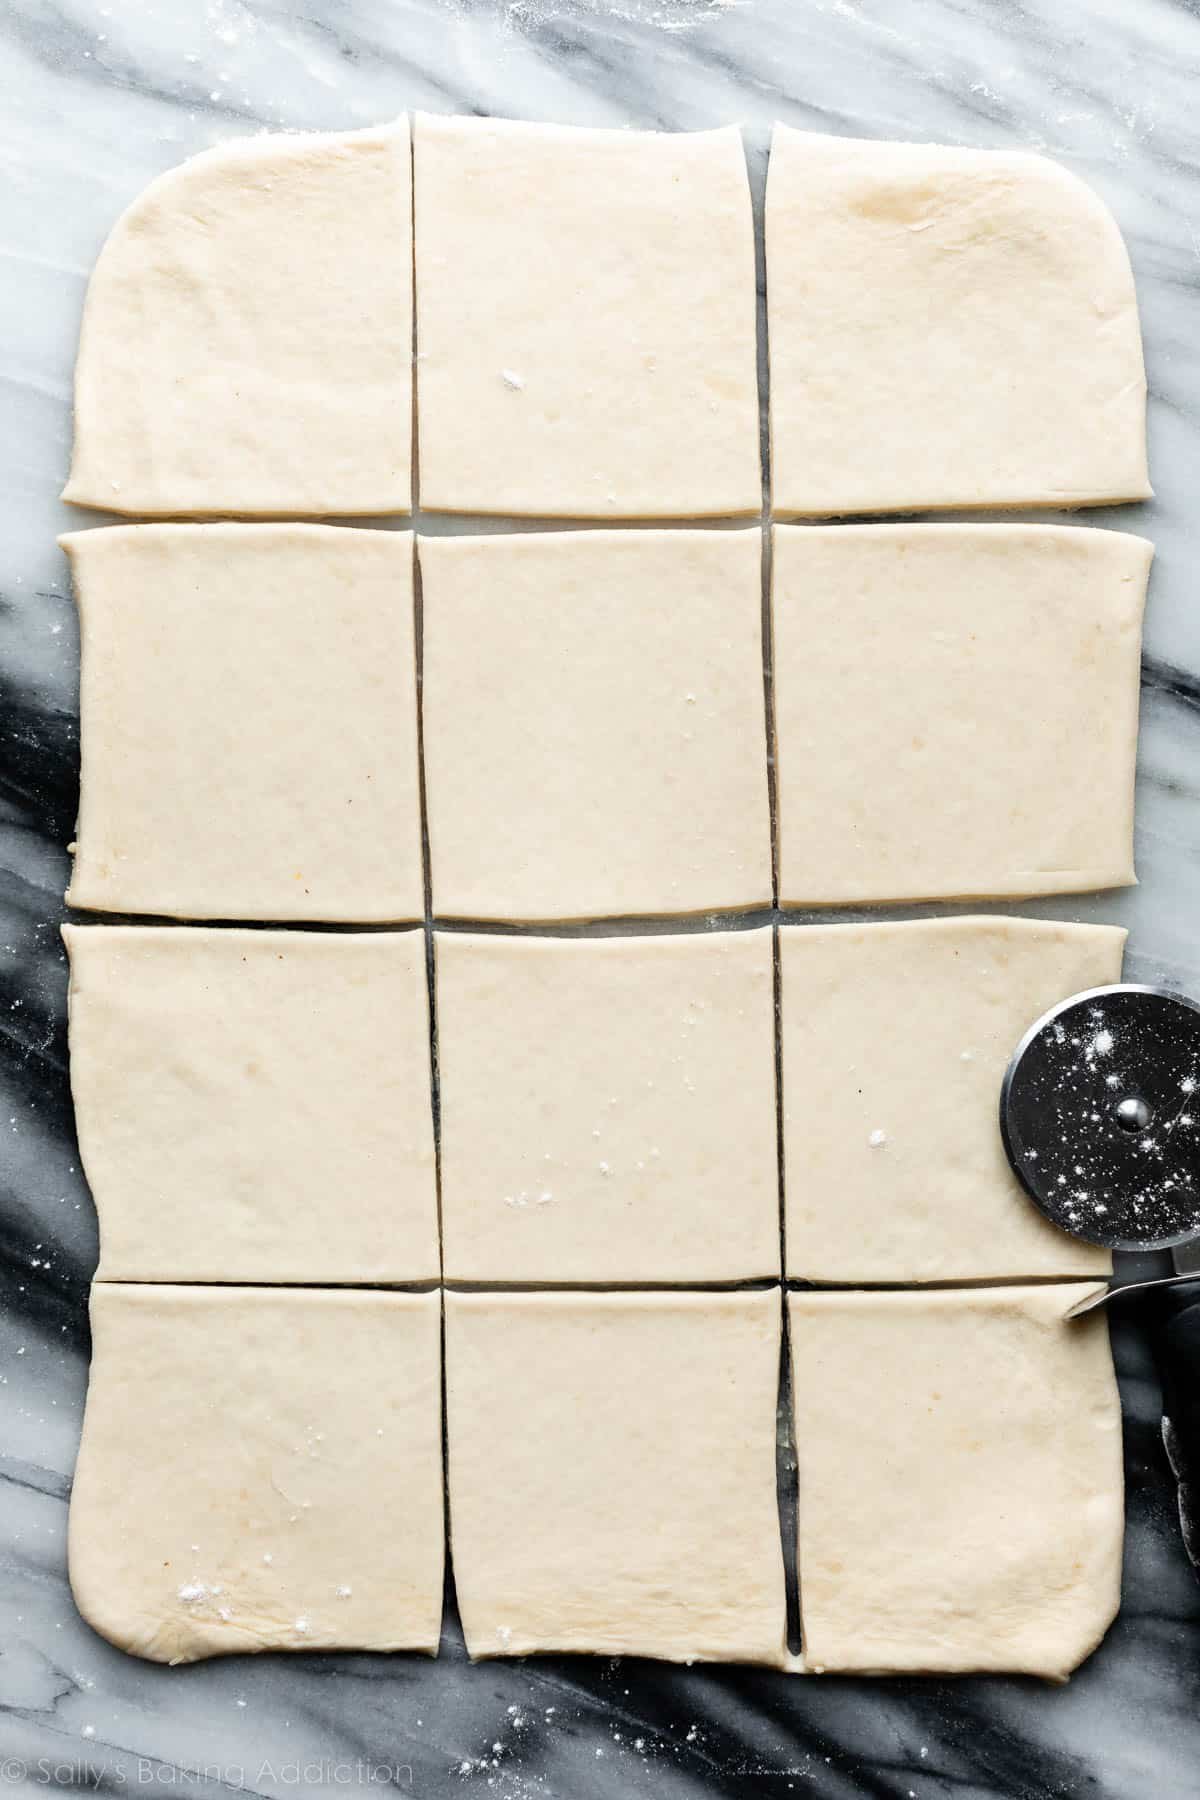 rolled out and cut homemade puff pastry dough, shaped into squares.